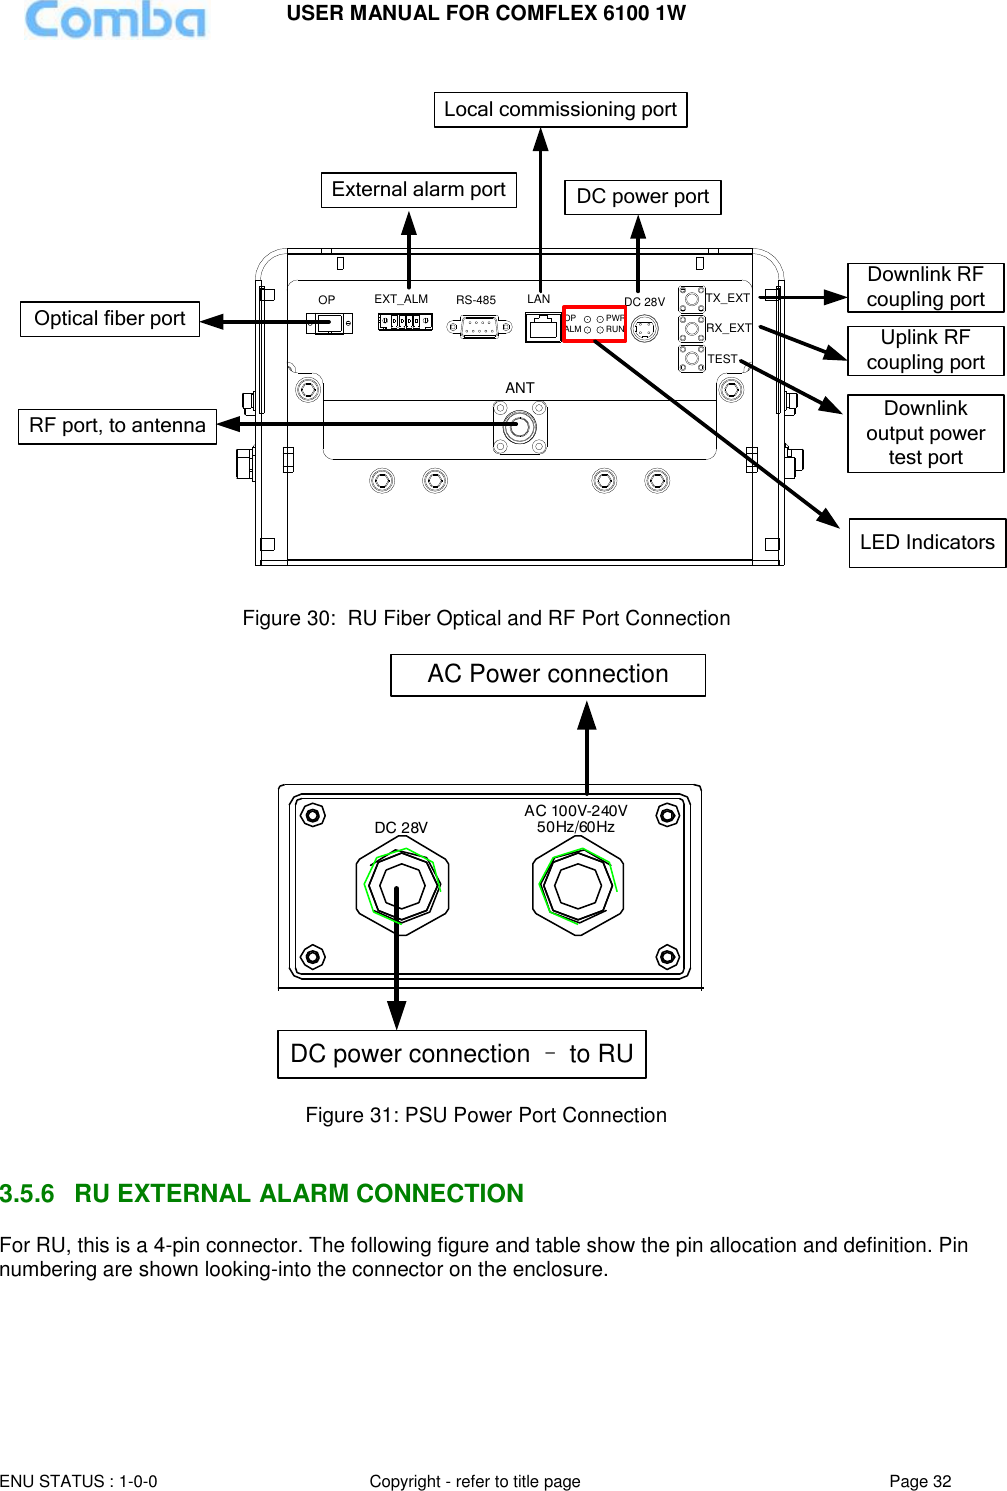 USER MANUAL FOR COMFLEX 6100 1W  ENU STATUS : 1-0-0 Copyright - refer to title page Page 32     ANTPWRRUNALMOPOP EXT_ALM RS-485 LAN DC 28V TX_EXTRX_EXTTESTOptical fiber portRF port, to antennaLocal commissioning portDC power portExternal alarm portDownlink RF coupling portUplink RF coupling portDownlink output power test portLED Indicators Figure 30:  RU Fiber Optical and RF Port Connection DC power connection – to RU DC 28VAC 100V-240V50Hz/60HzAC Power connection Figure 31: PSU Power Port Connection   3.5.6  RU EXTERNAL ALARM CONNECTION  For RU, this is a 4-pin connector. The following figure and table show the pin allocation and definition. Pin numbering are shown looking-into the connector on the enclosure.  